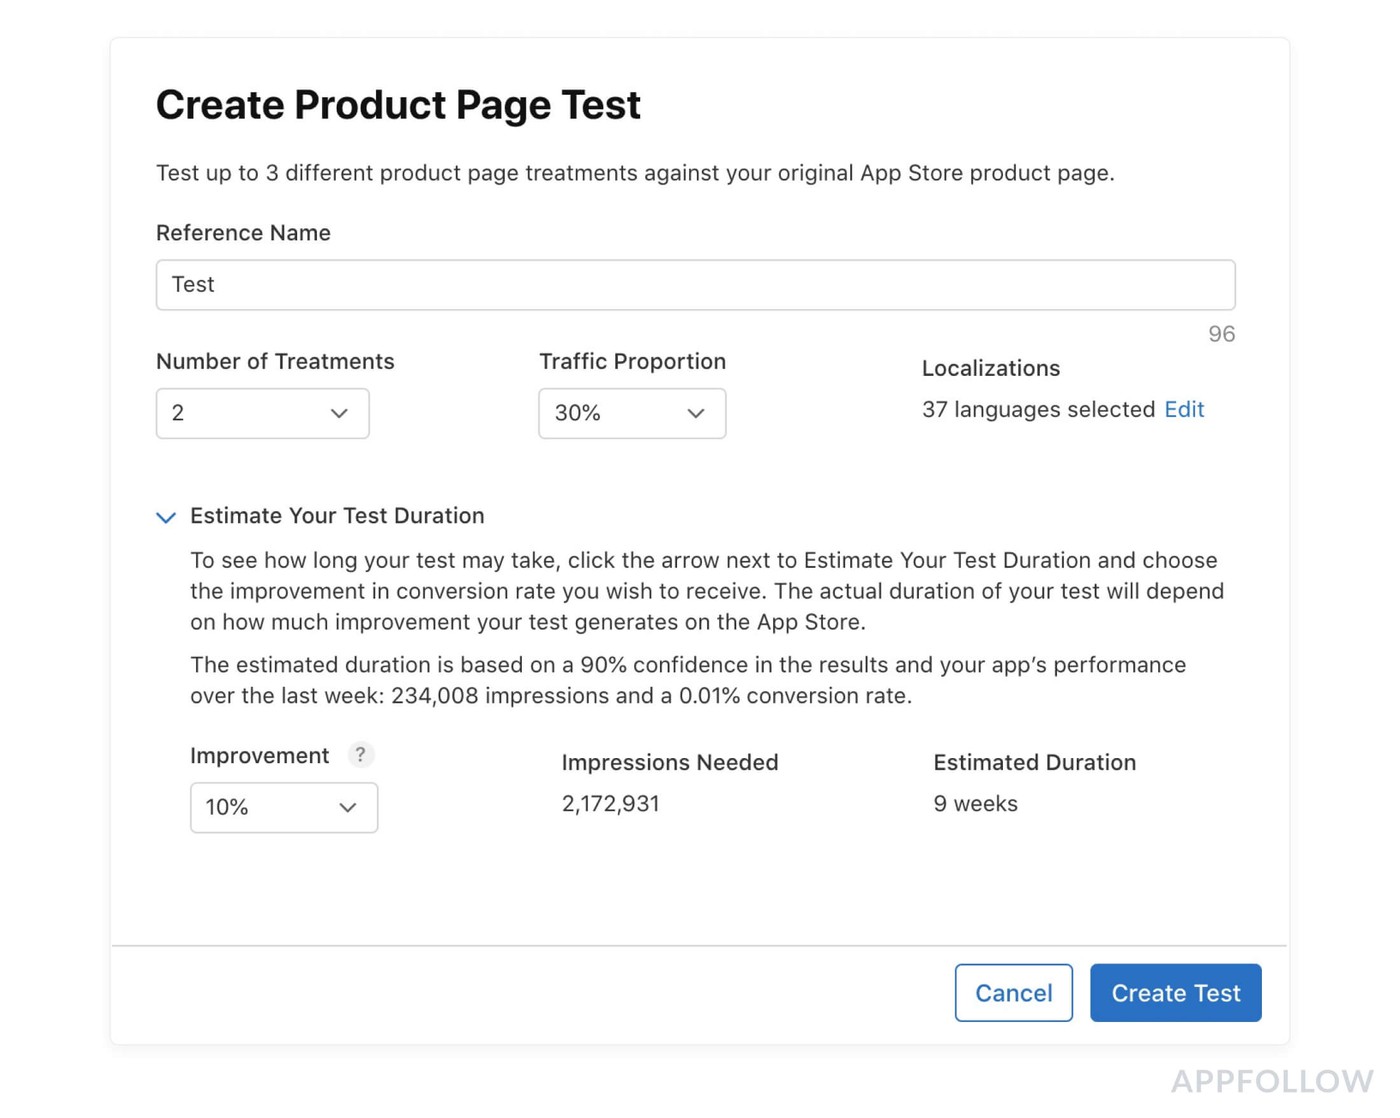 How to set an A/B test for the App Store Product Pages